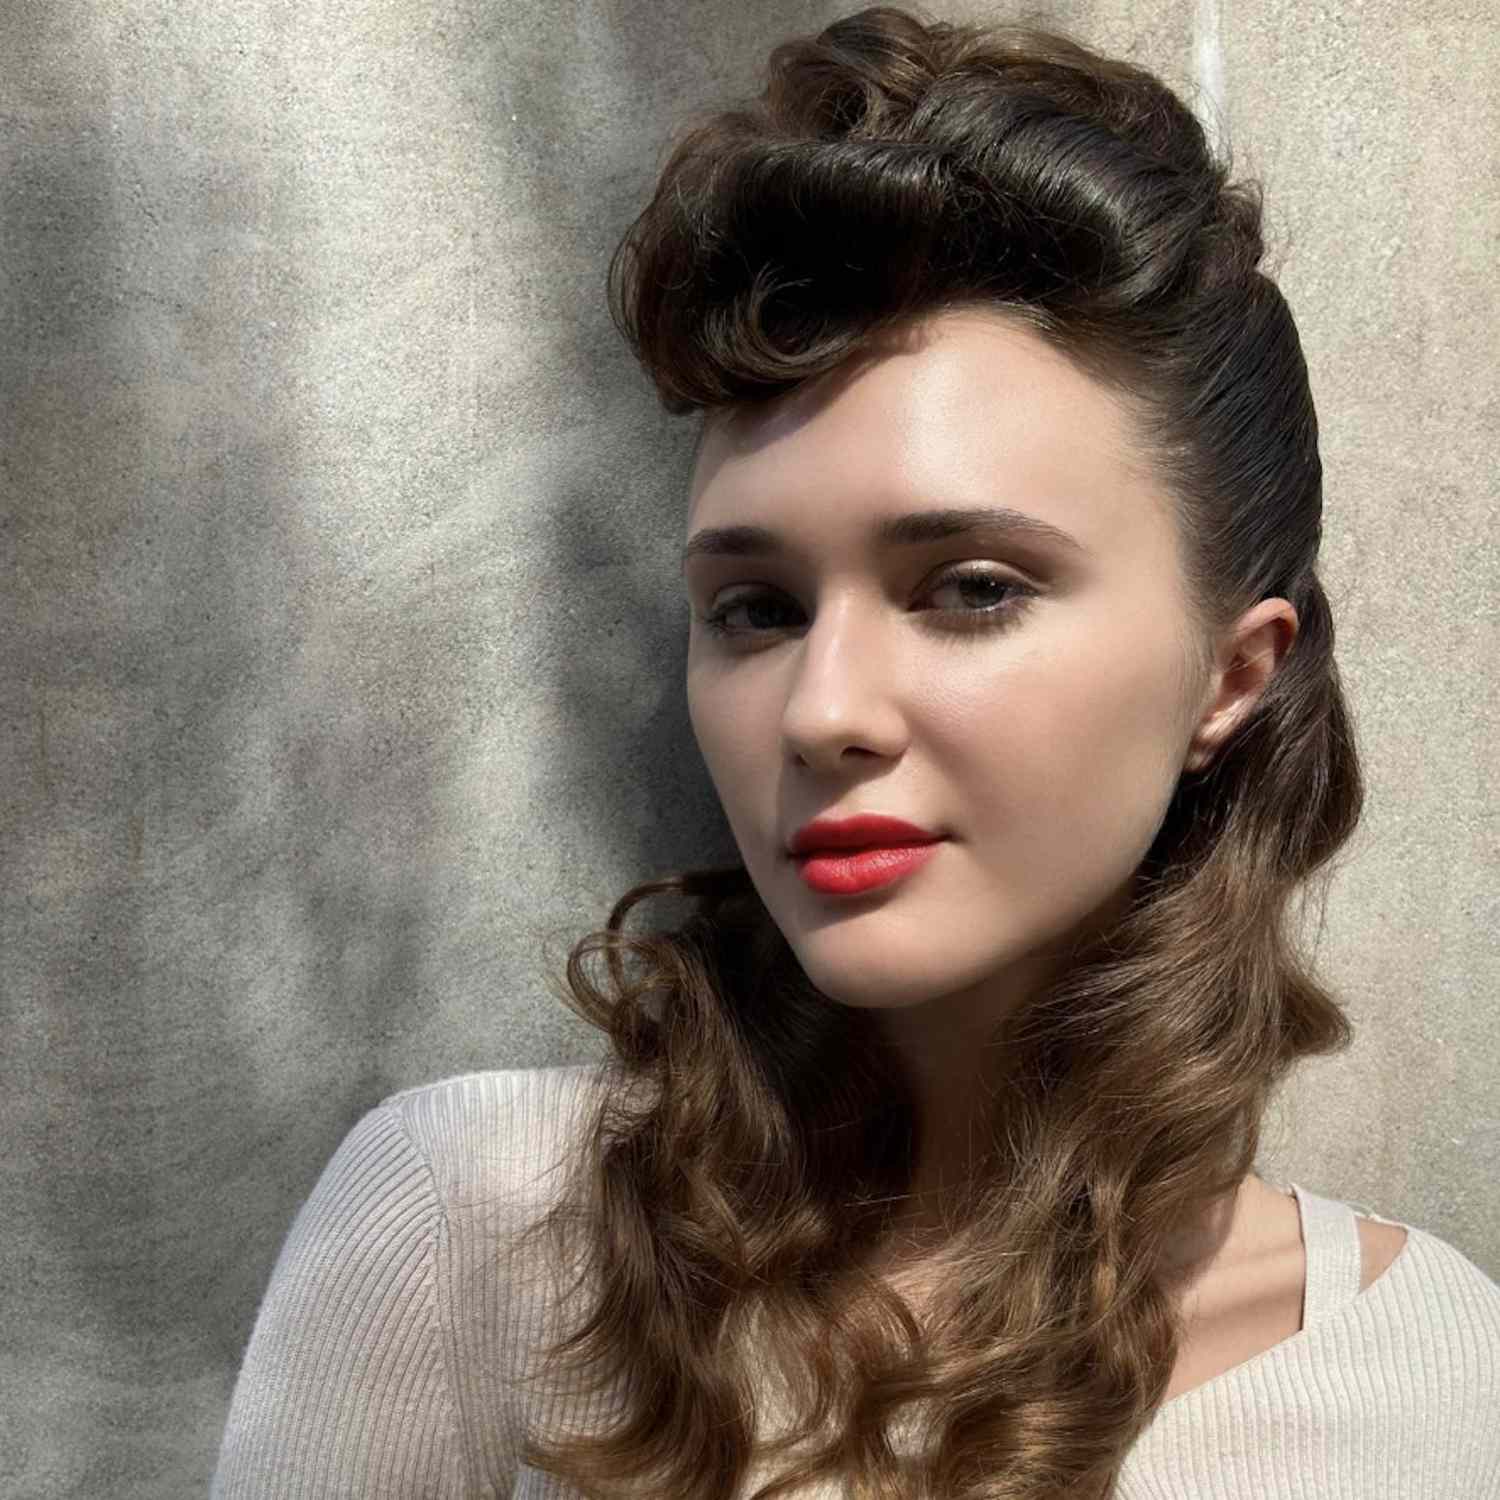 Close-up of woman with voluminous wavy half-up hairstyle and red lipstick